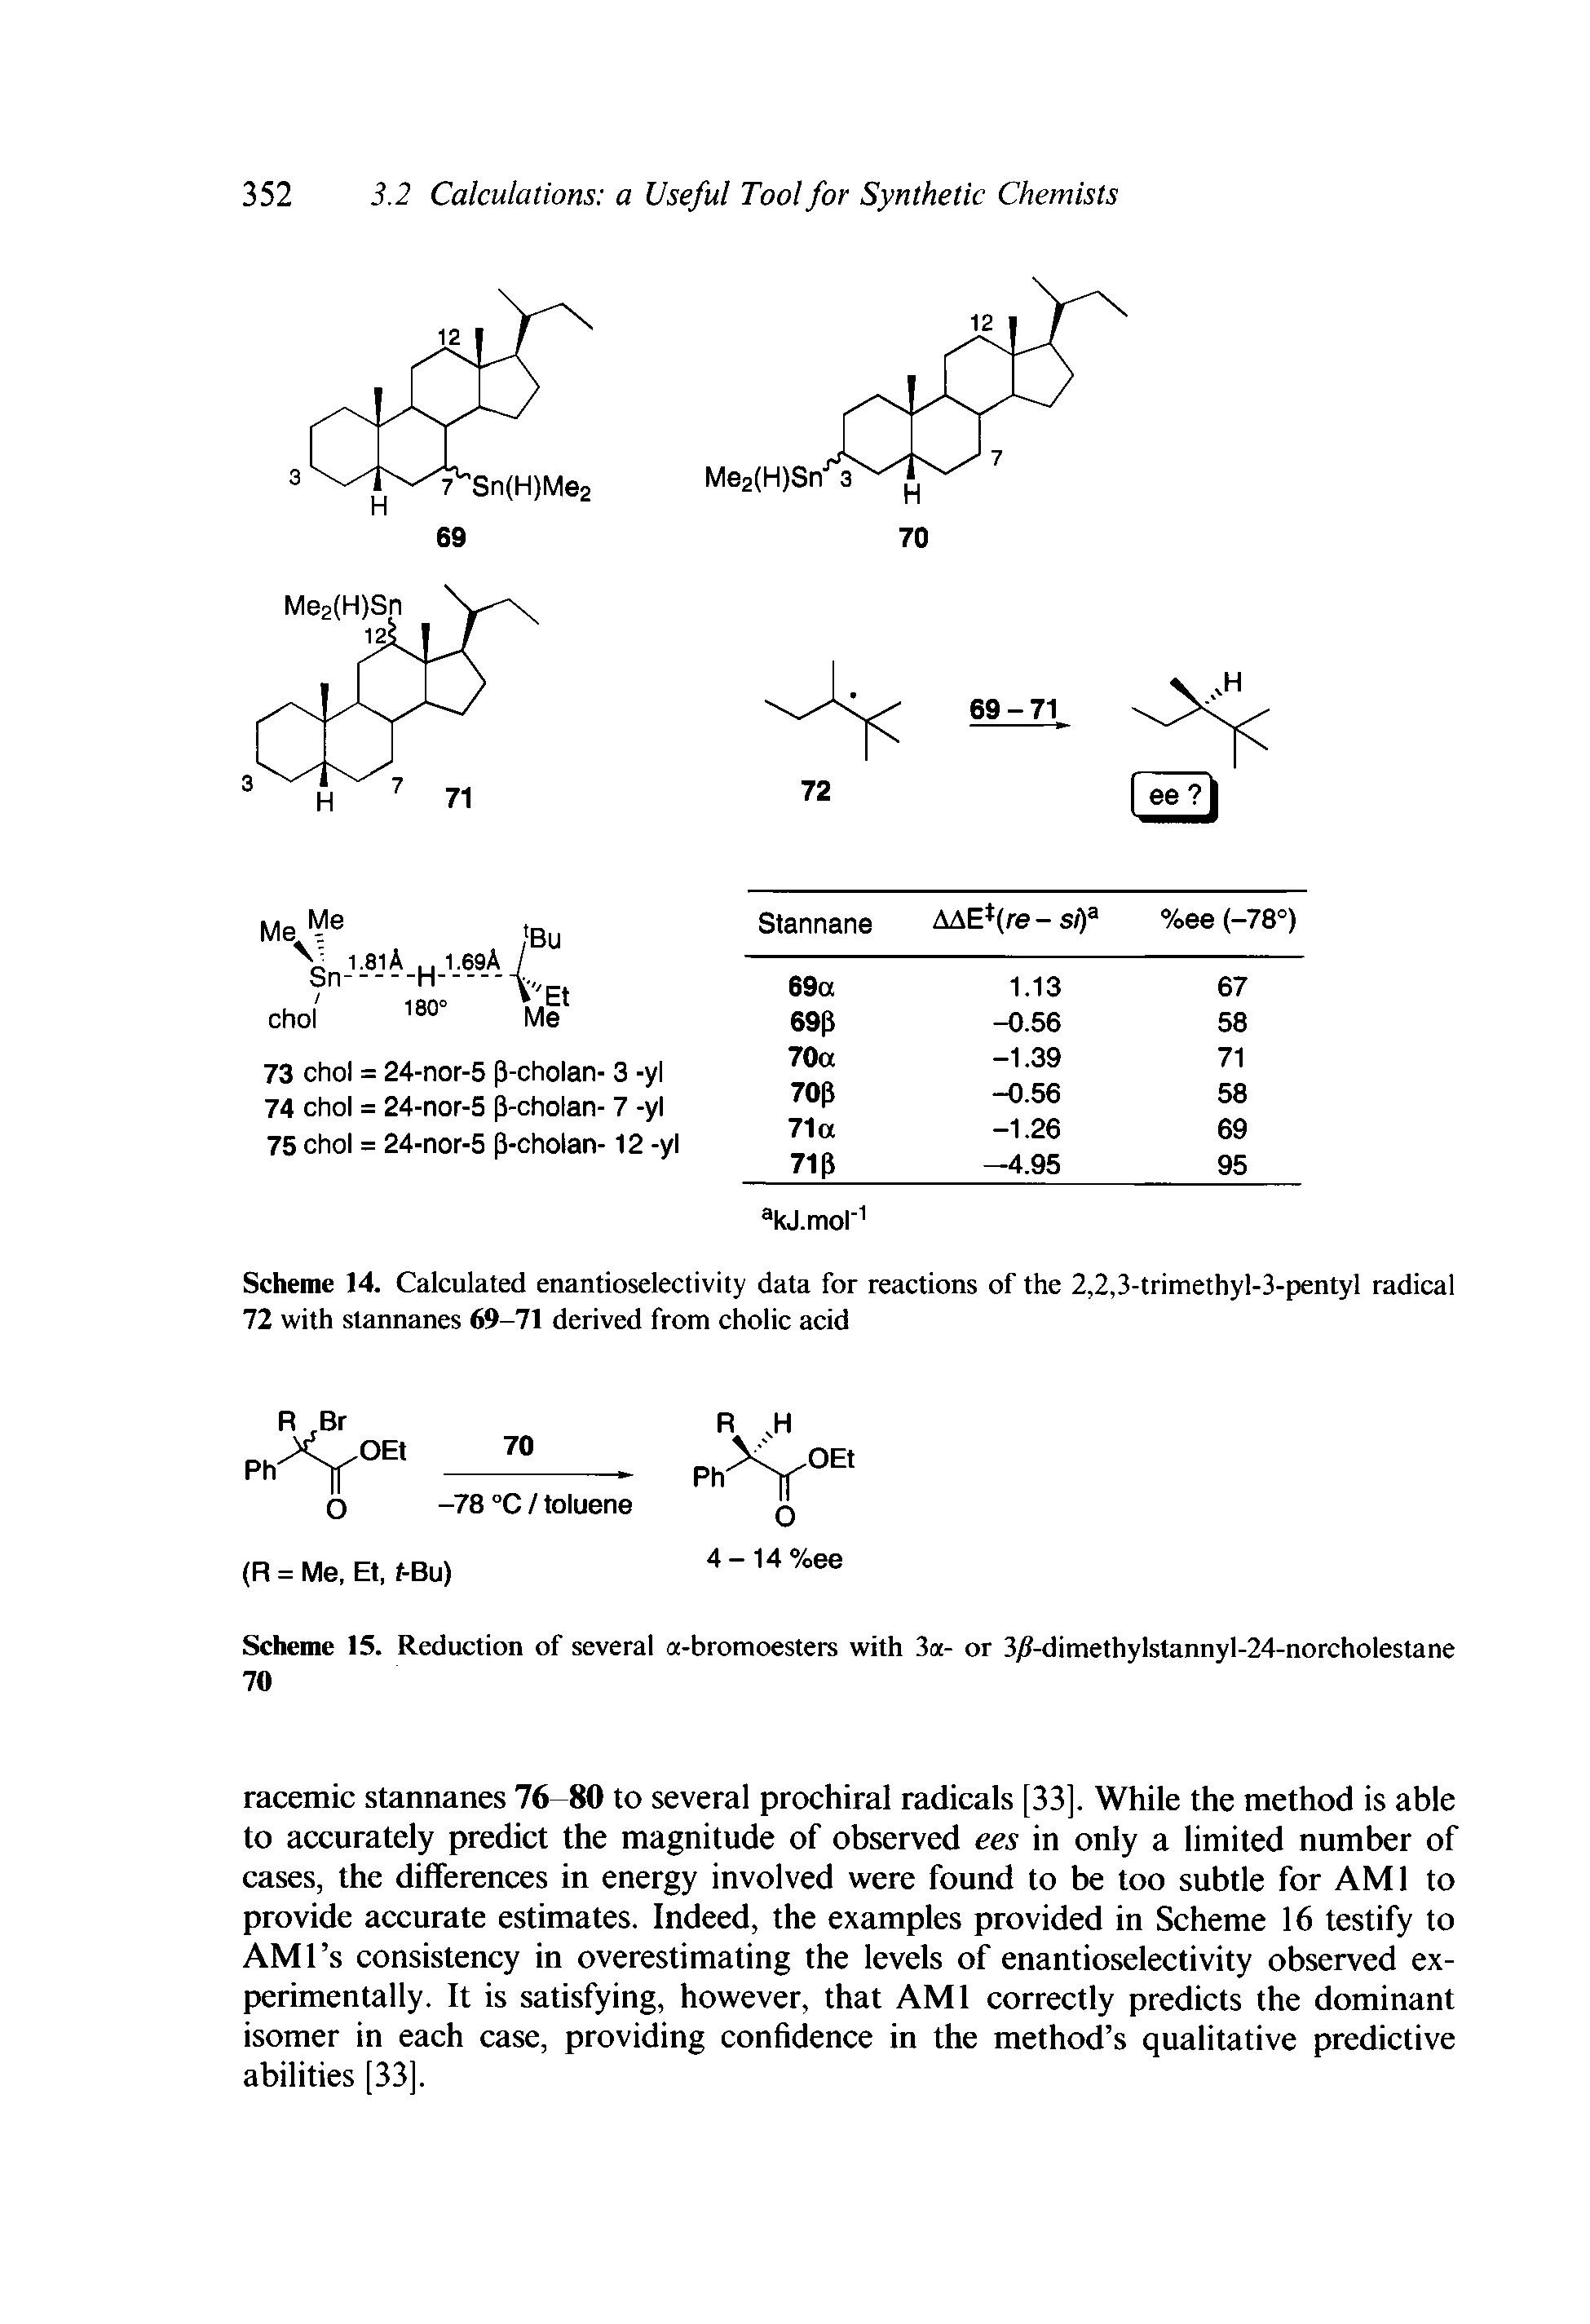 Scheme 14. Calculated enantioselectivity data for reactions of the 2,2,3-trimethyl-3-pentyl radical 72 with stannanes 69-71 derived from cholic acid...